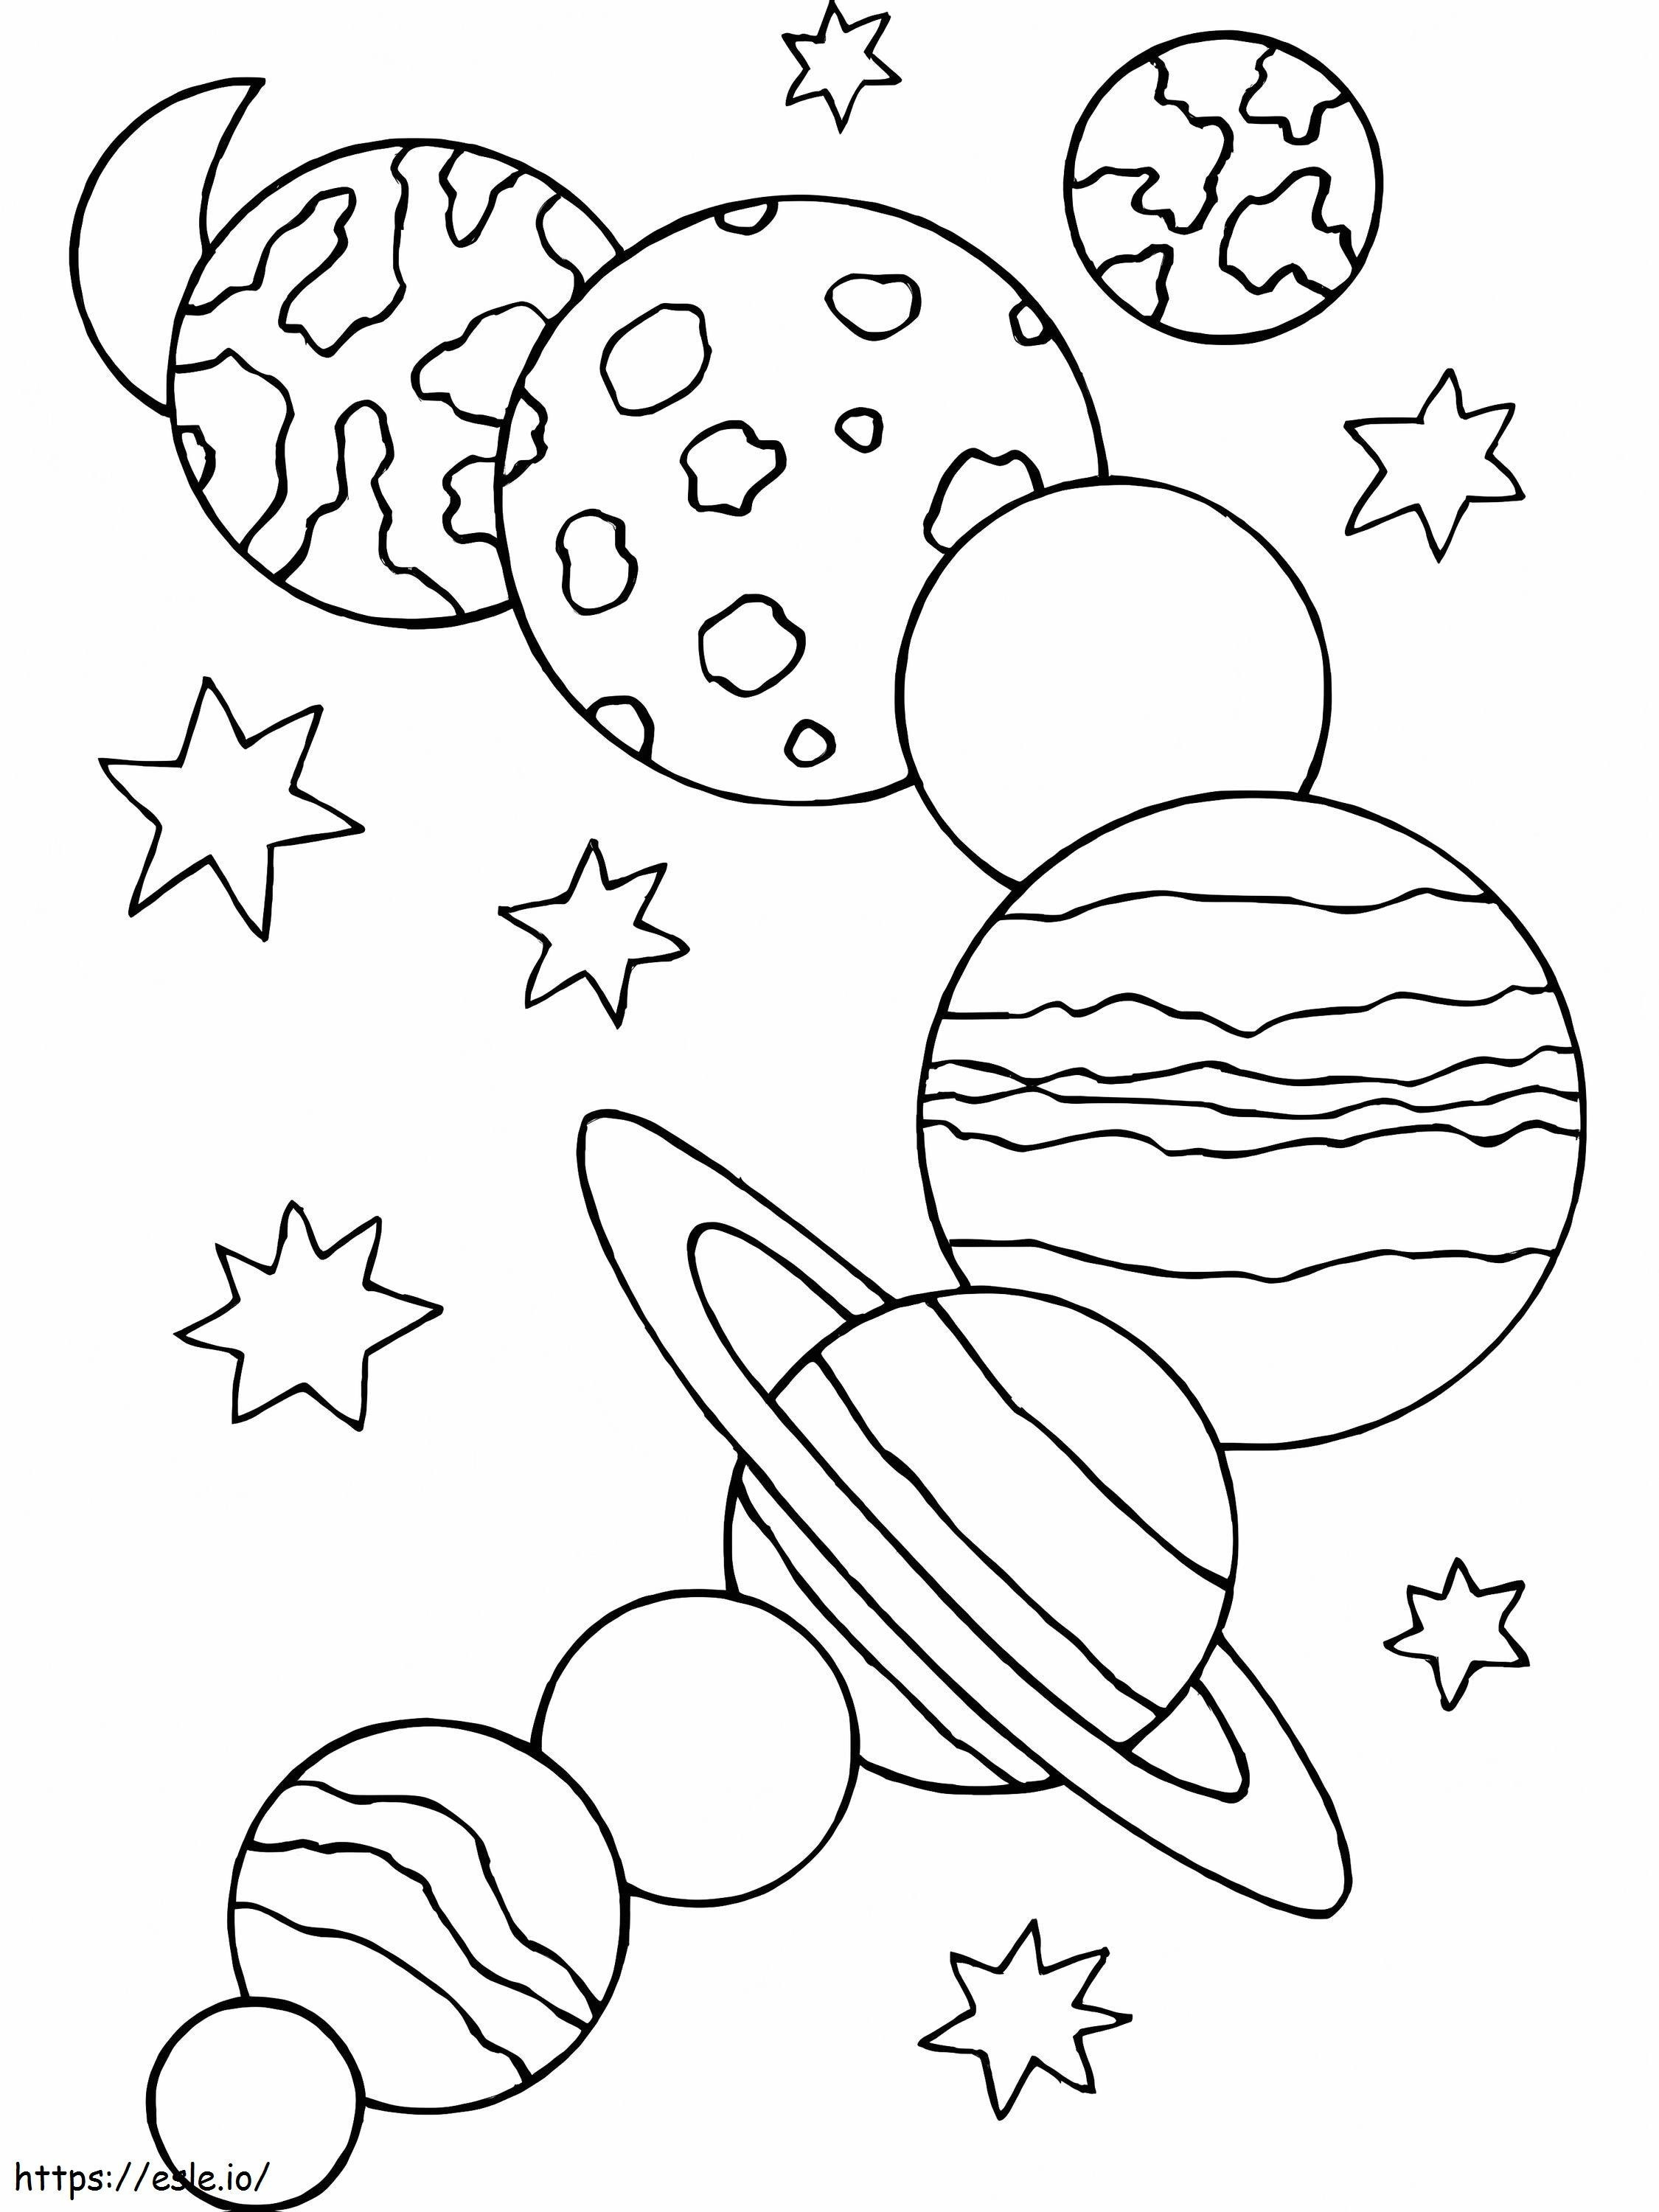 Normal Space coloring page